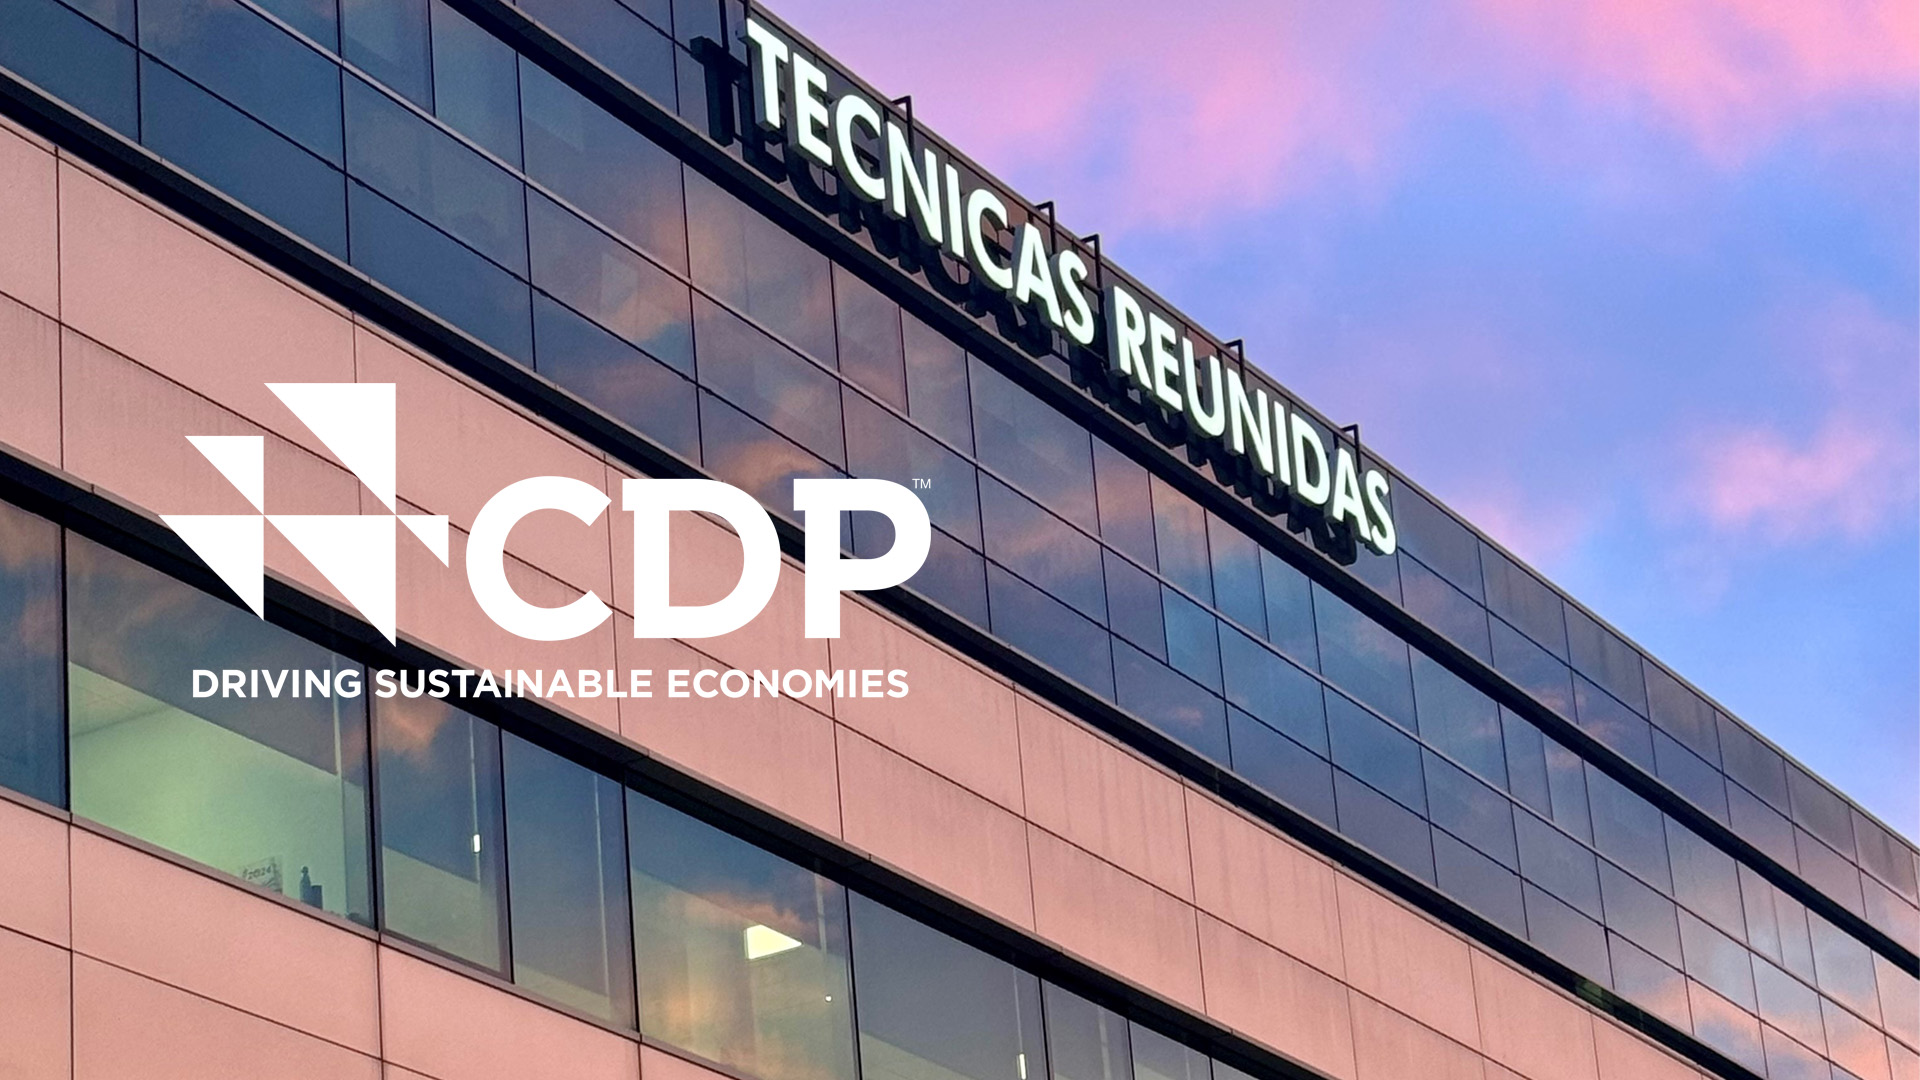 Técnicas Reunidas obtains the highest rating in climate change at CDP